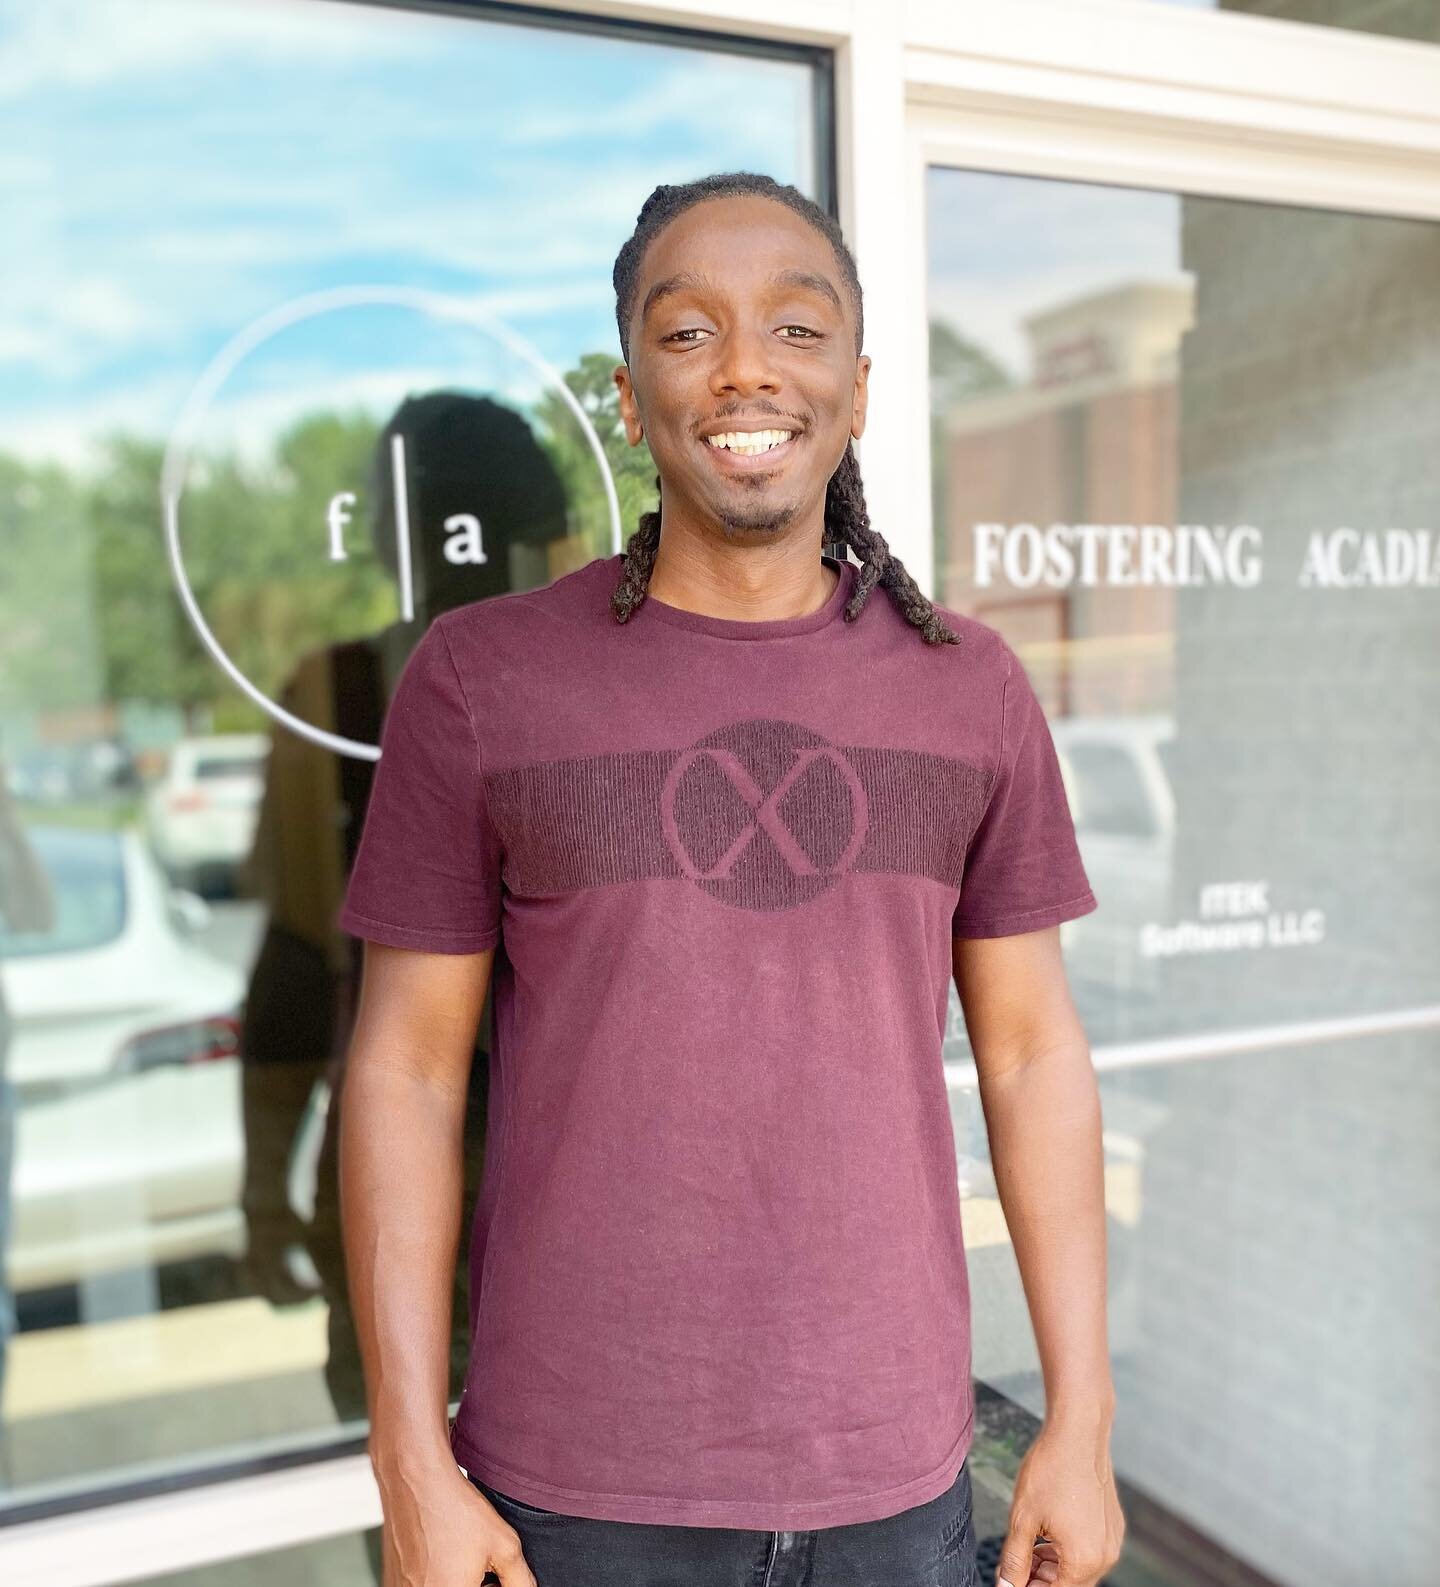 New staff ✨ Join us in welcoming our newest Case Aide, Marquis, to the team! Marquis has a unique ability to connect with others and is looking forwarding to jumping in and getting to know the youth at FA.

When he&rsquo;s not serving his community, 